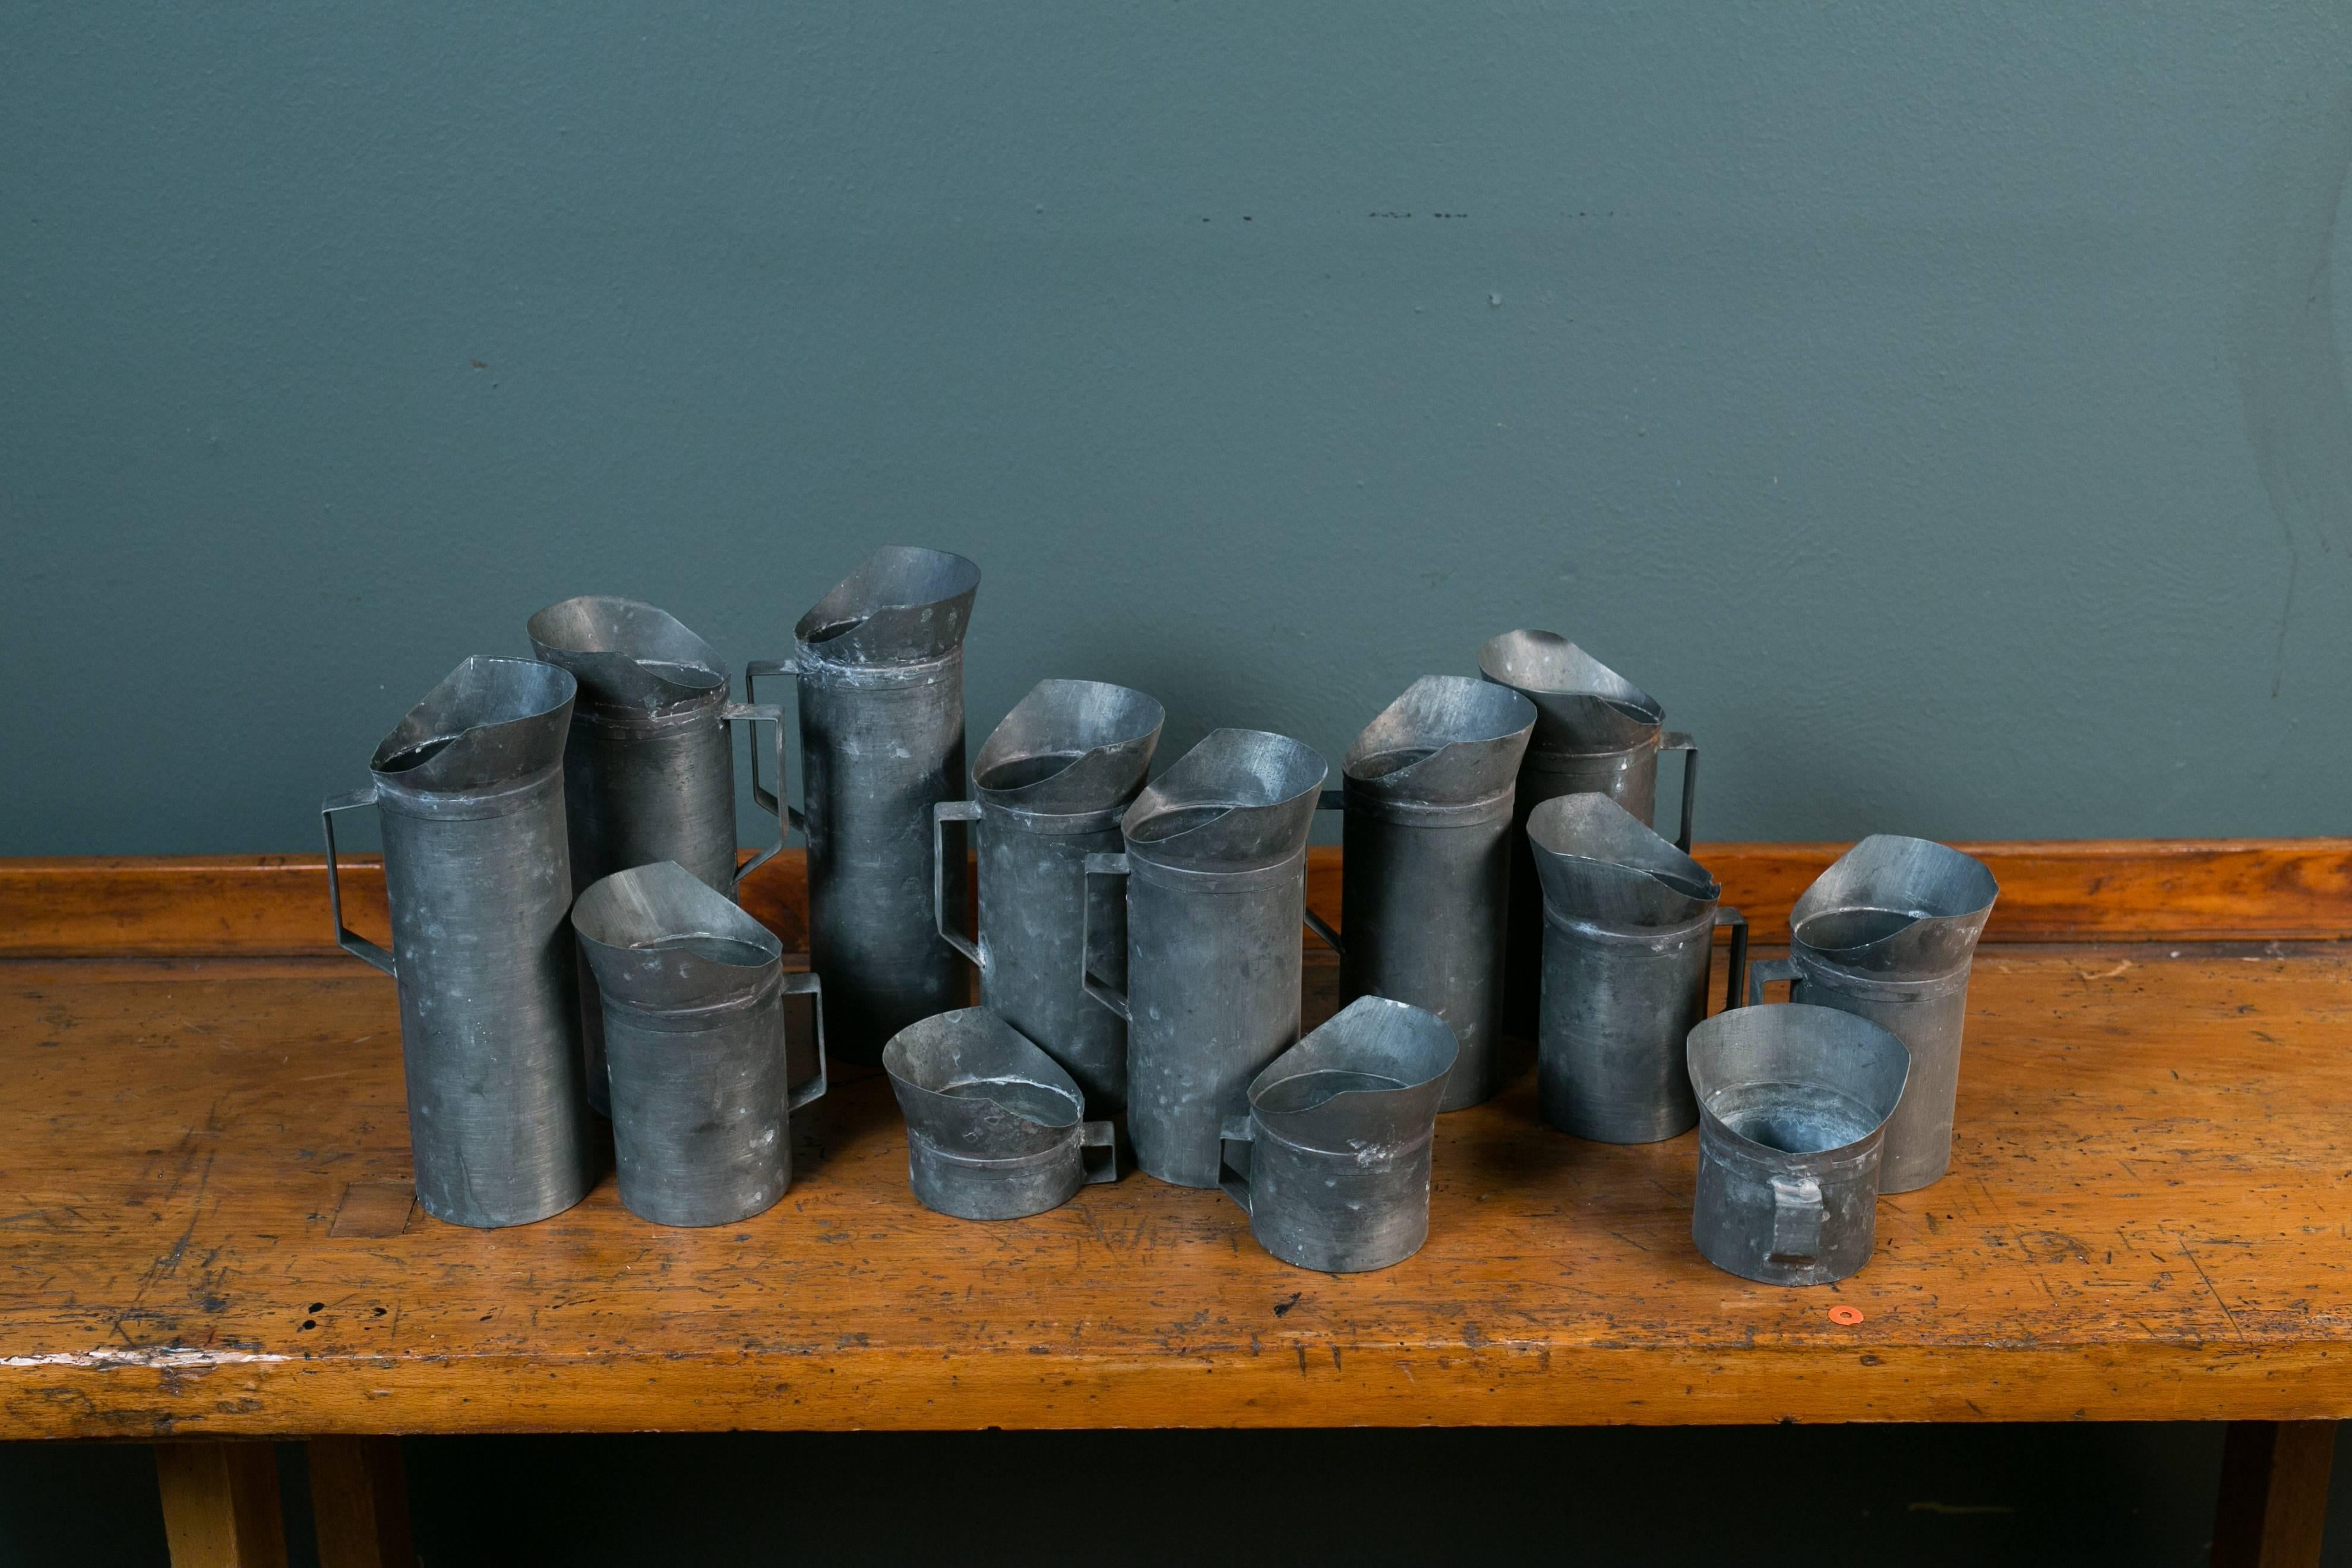 Collection of 13 zinc measures or pitchers, handmade in France, circa 1940s. Shortest measures 3.75 inches W x 4.25 inches D x 2.75 inches h. Measurement listed is of tallest ones. Not guaranteed to be water tight- some appear to be, some don't.